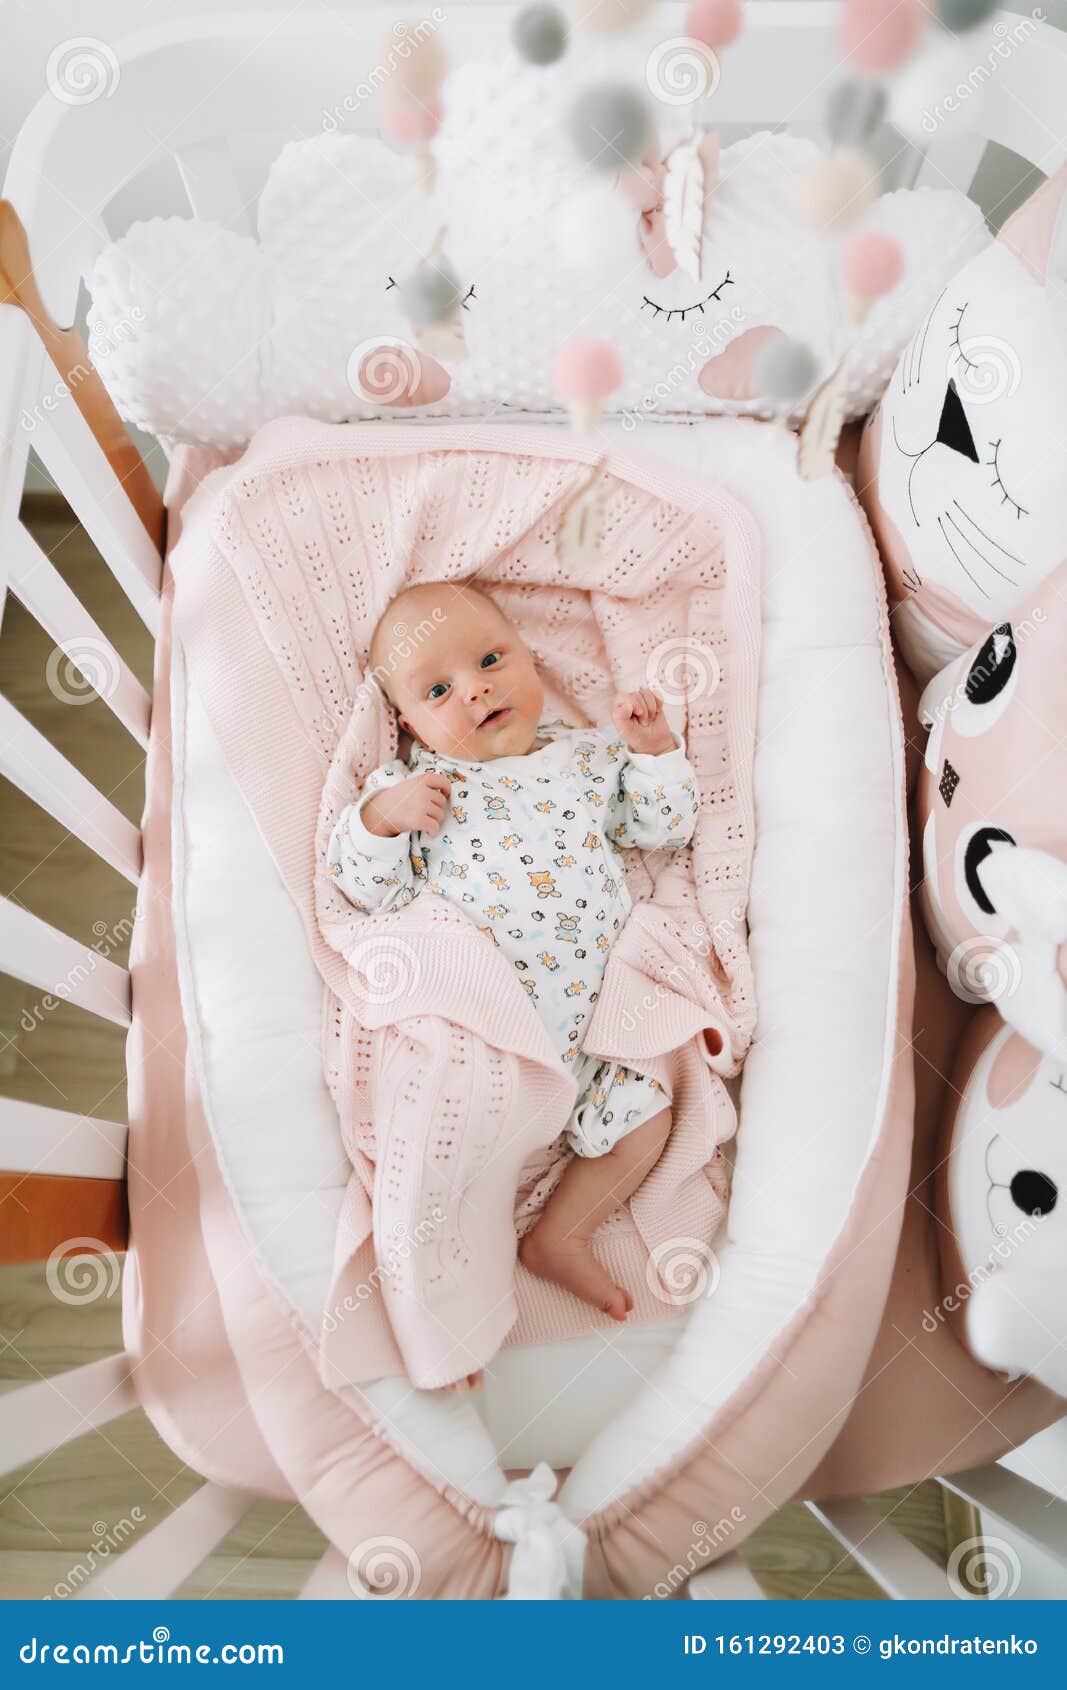 A Lovely Newborn Baby Girl On A Blanket Portrait Of A Beautiful Newborn Baby Newborn Girl In Bed Healthy Baby Soon After Birth Stock Image Image Of Beauty